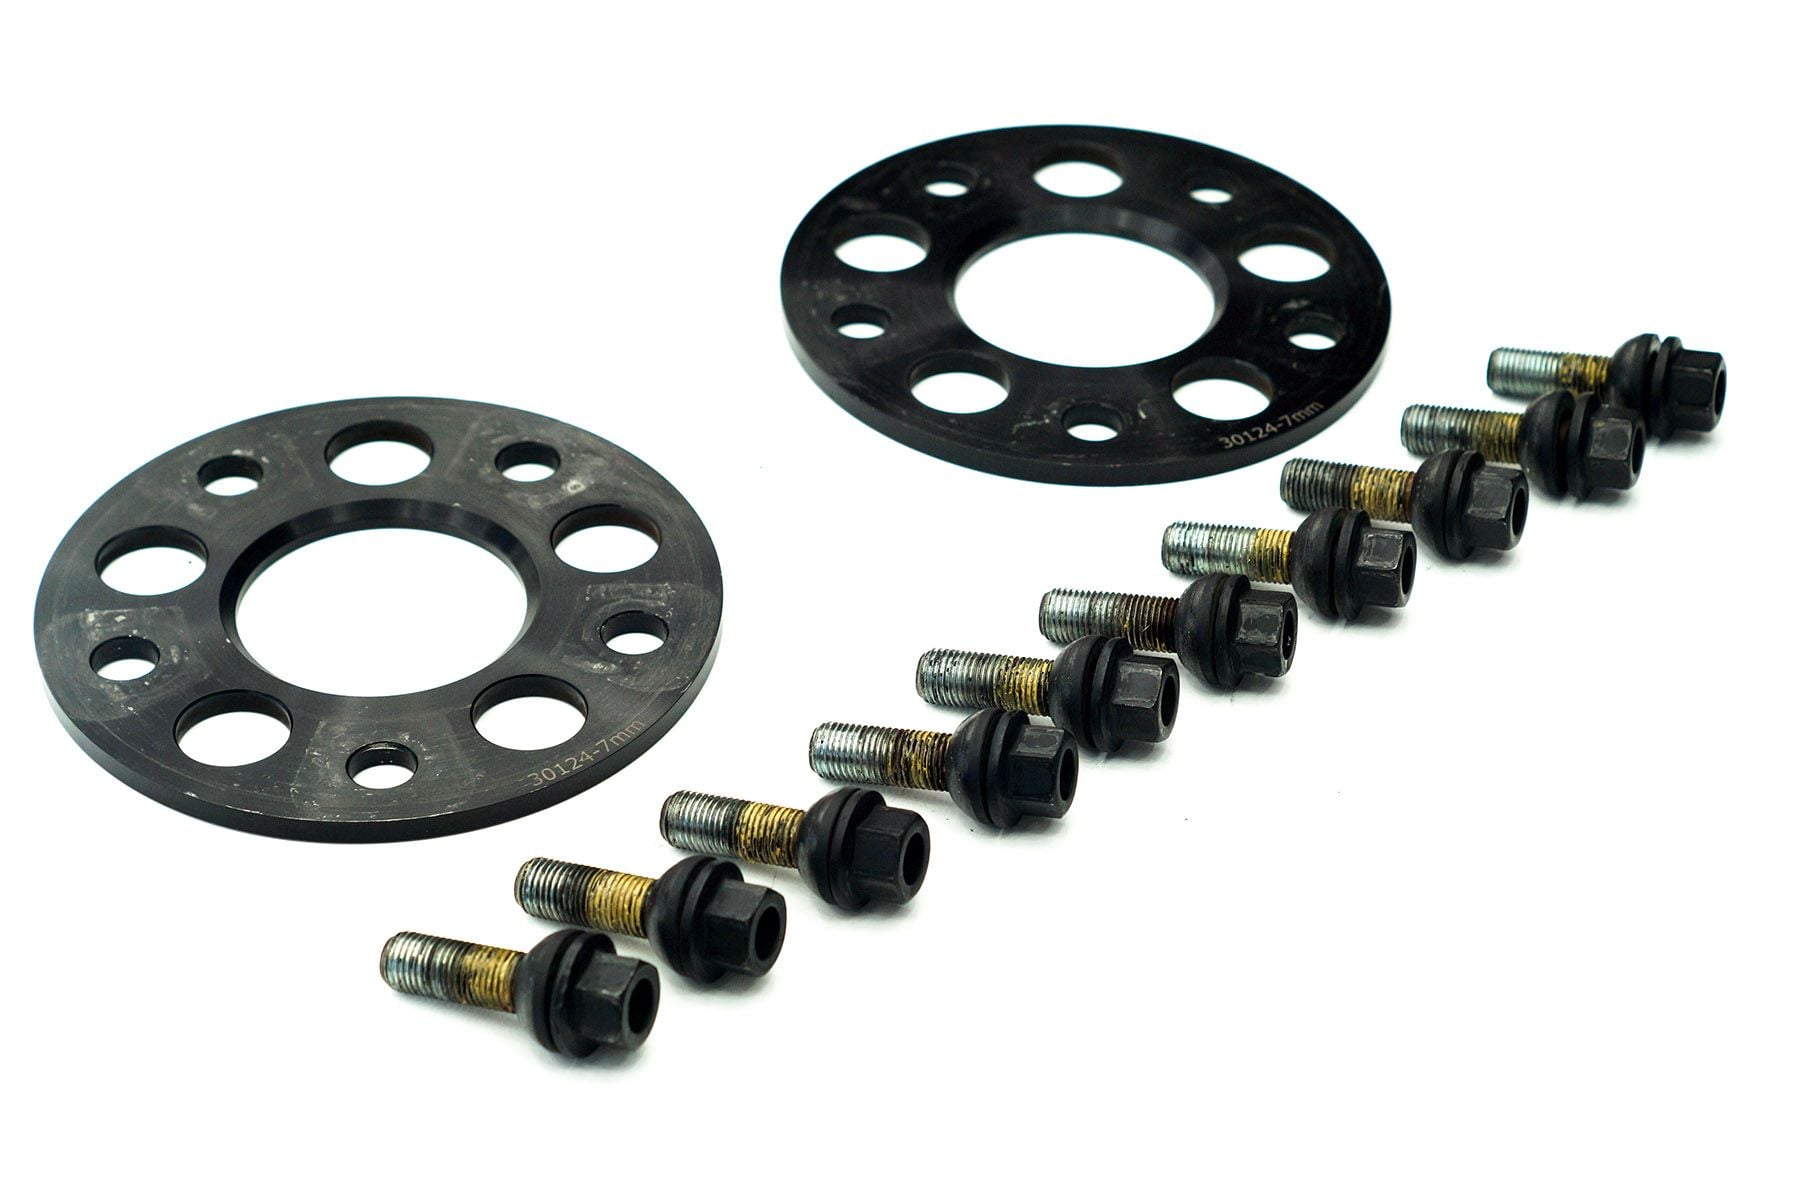 2006 Porsche 911 - 7MM Black Hub Centric Wheel Spacers w/ Extended Black Wheel Bolts - Accessories - $95 - Bayport, NY 11705, United States